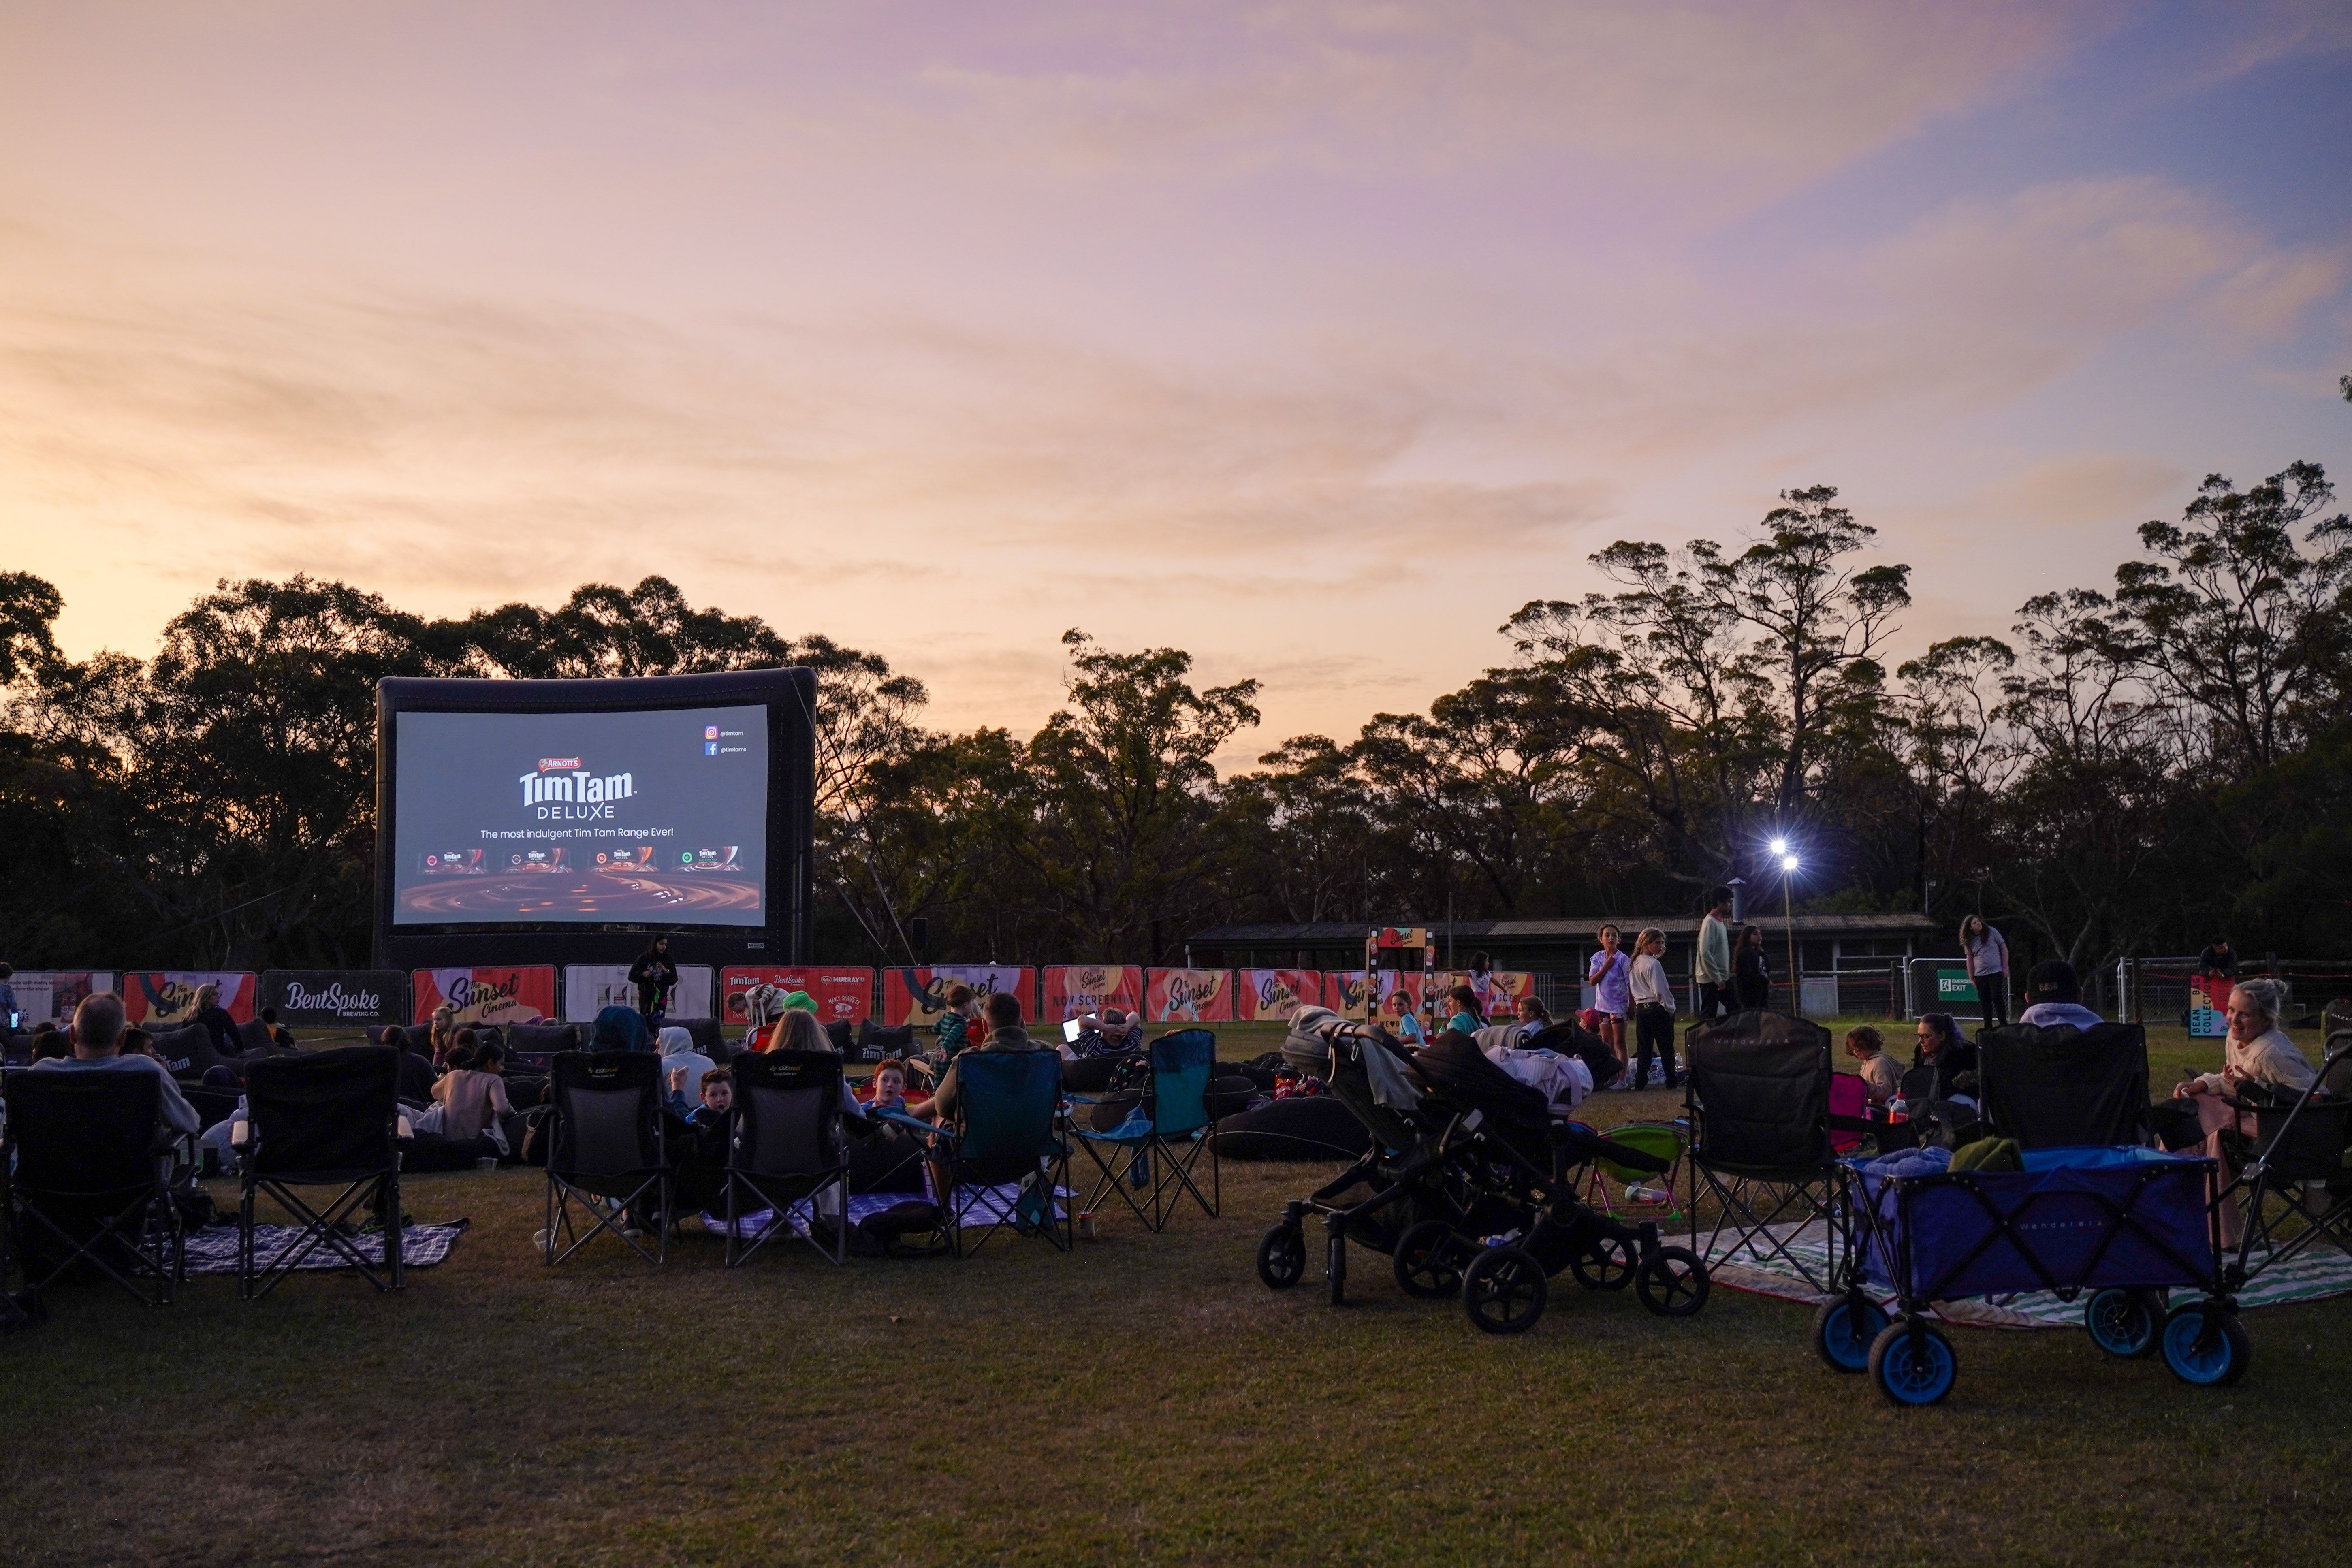 Tim Tam x Sunset Cinema Giveaway Terms and Conditions